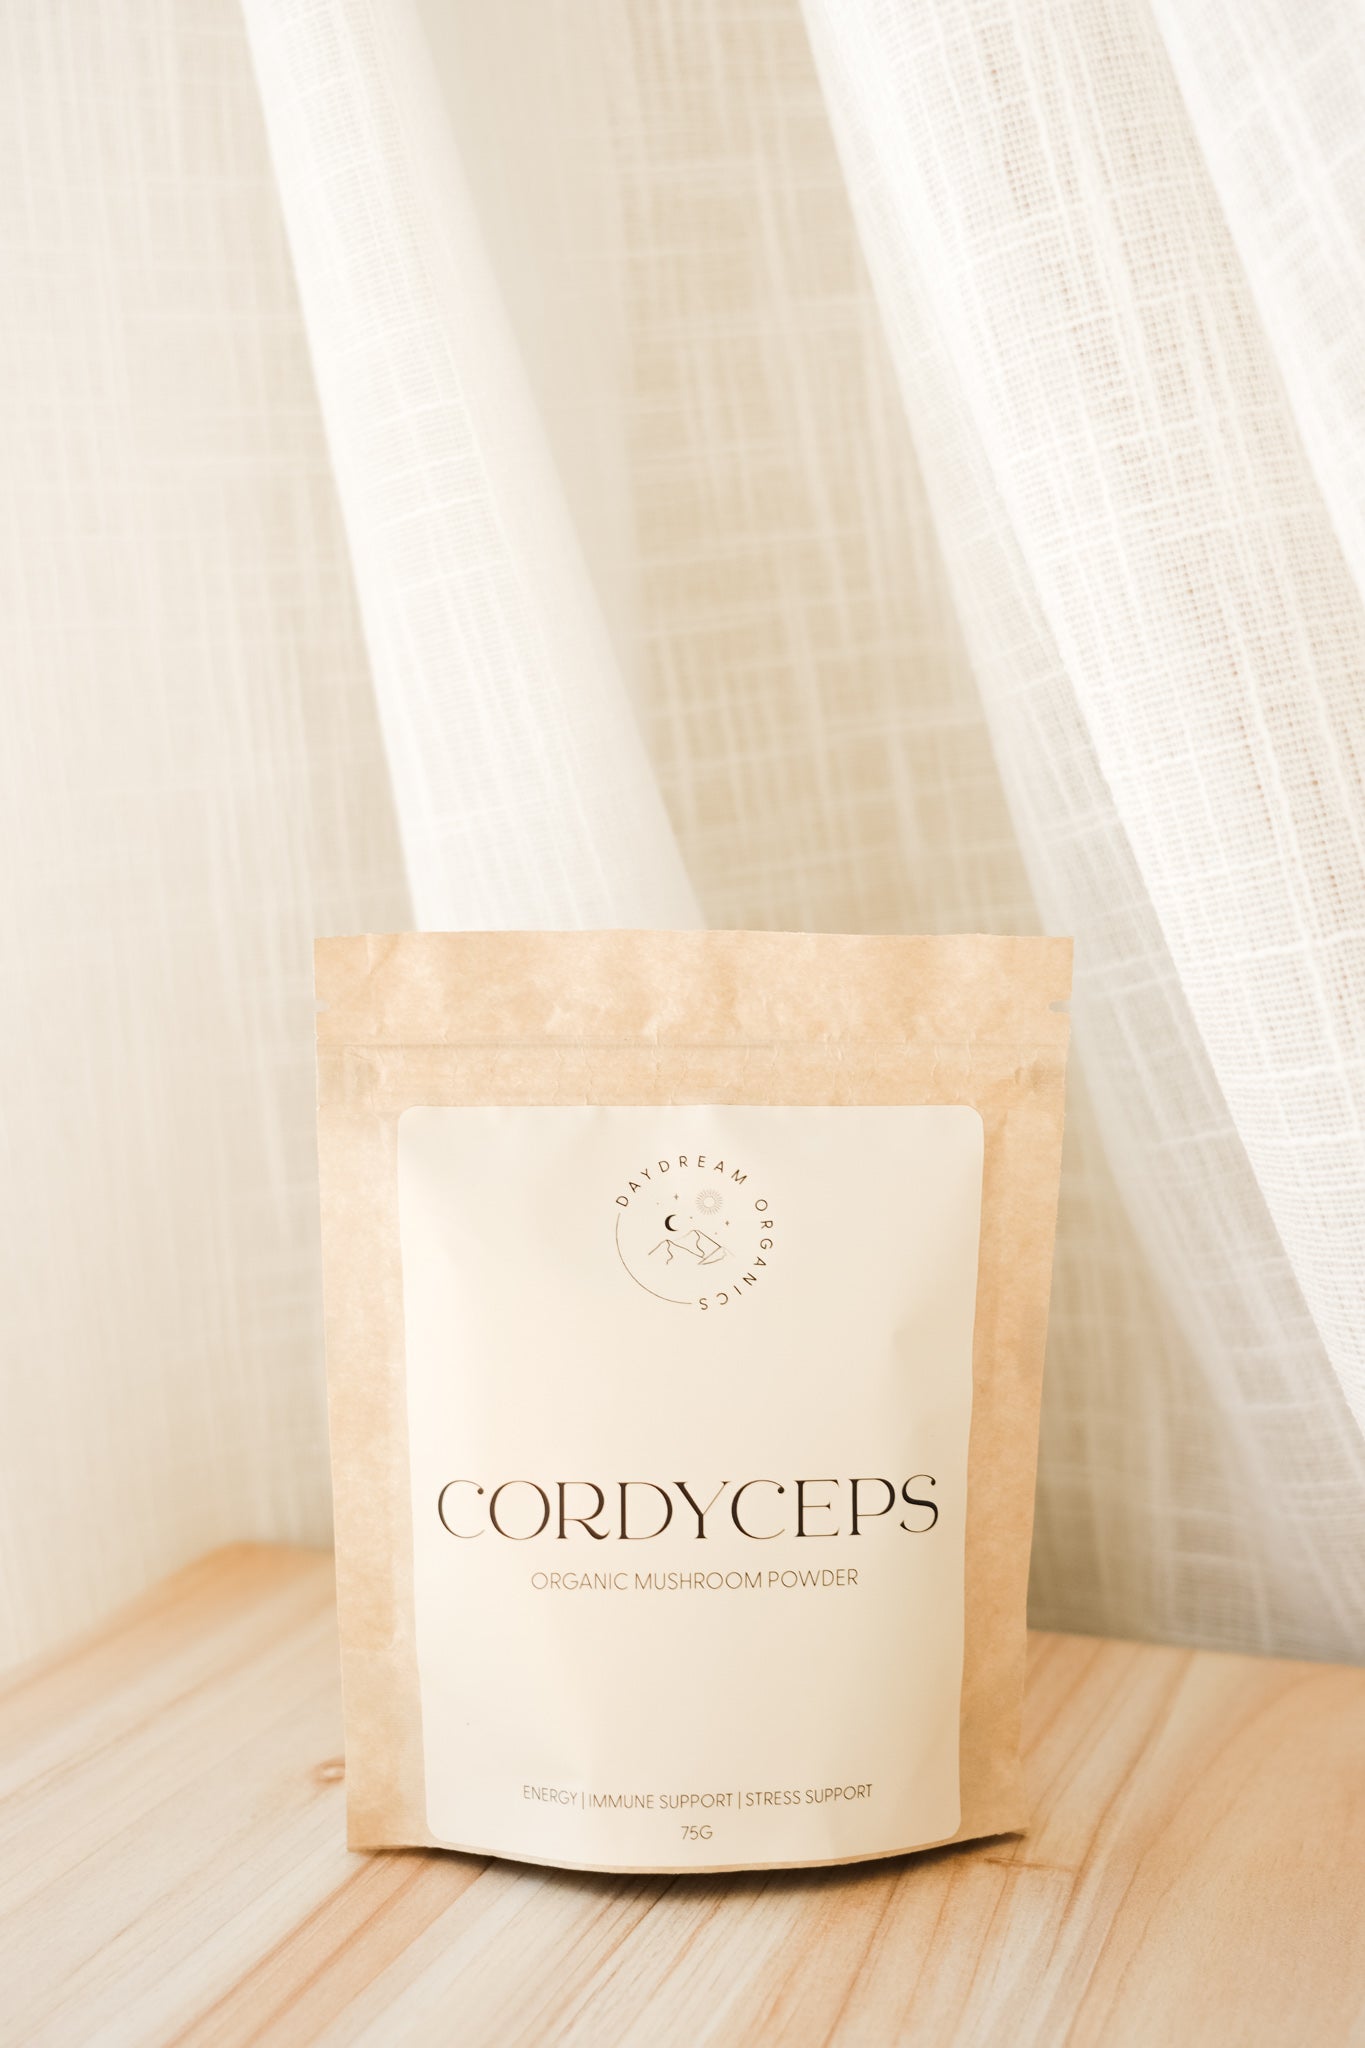 Our organic Cordyceps mushroom powder is an adaptogenic mushroom powder that can be used to stabilize energy and stress levels as well as enhance stamina, endurance and oxygen uptake.